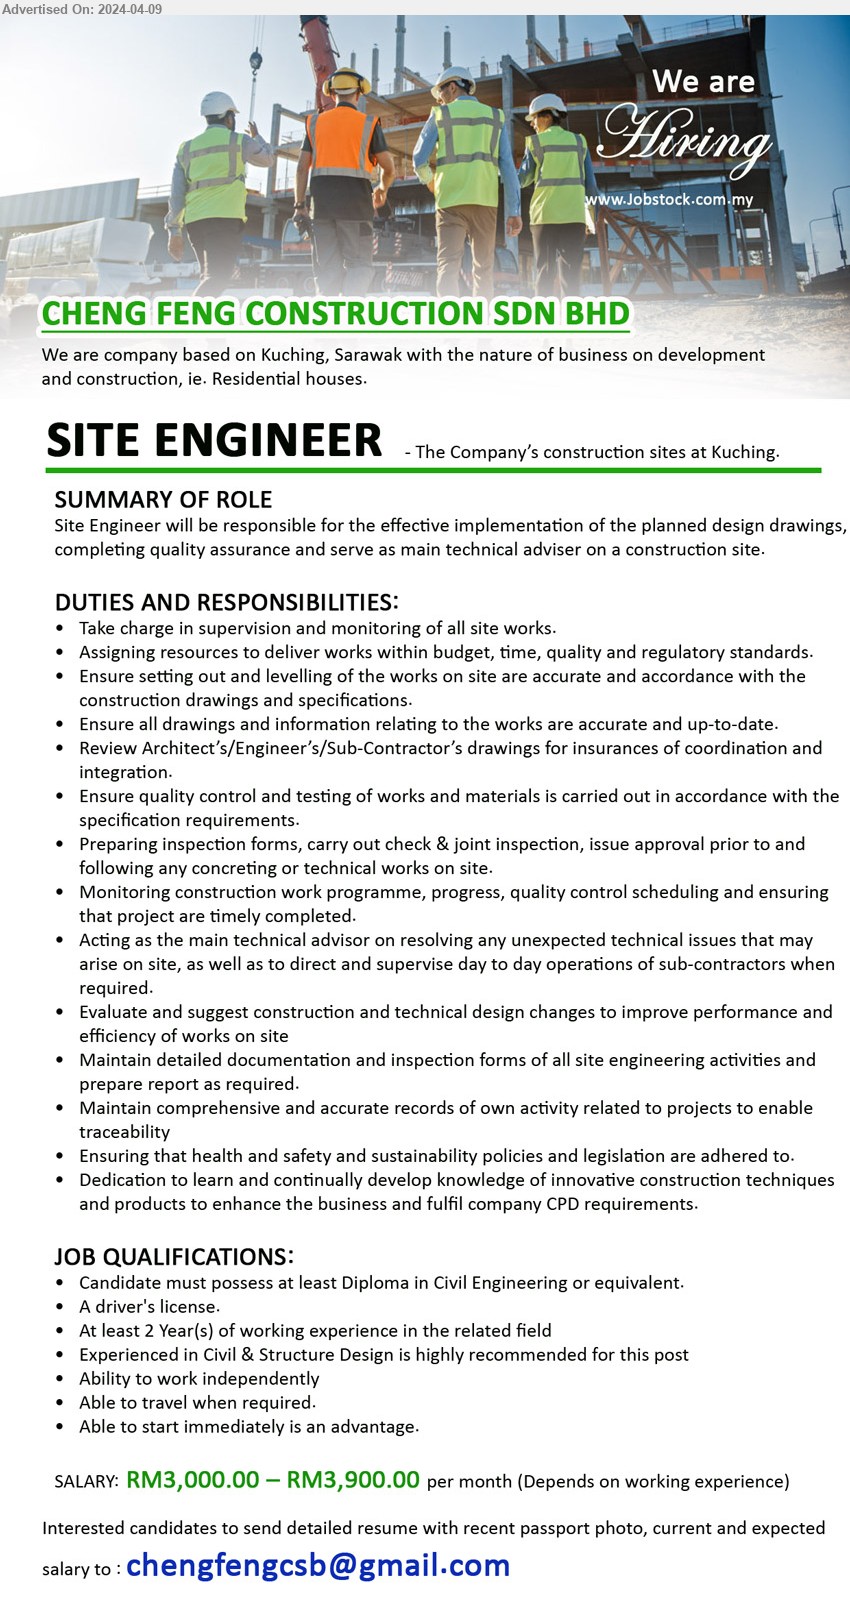 CHENG FENG CONSTRUCTION SDN BHD - SITE ENGINEER (Kuching), RM3,000.00 – RM3,900.00, Diploma in Civil Engineering, 2 yrs. exp., Experienced in Civil & Structure Design is highly recommended for this post,...
Email resume to ...